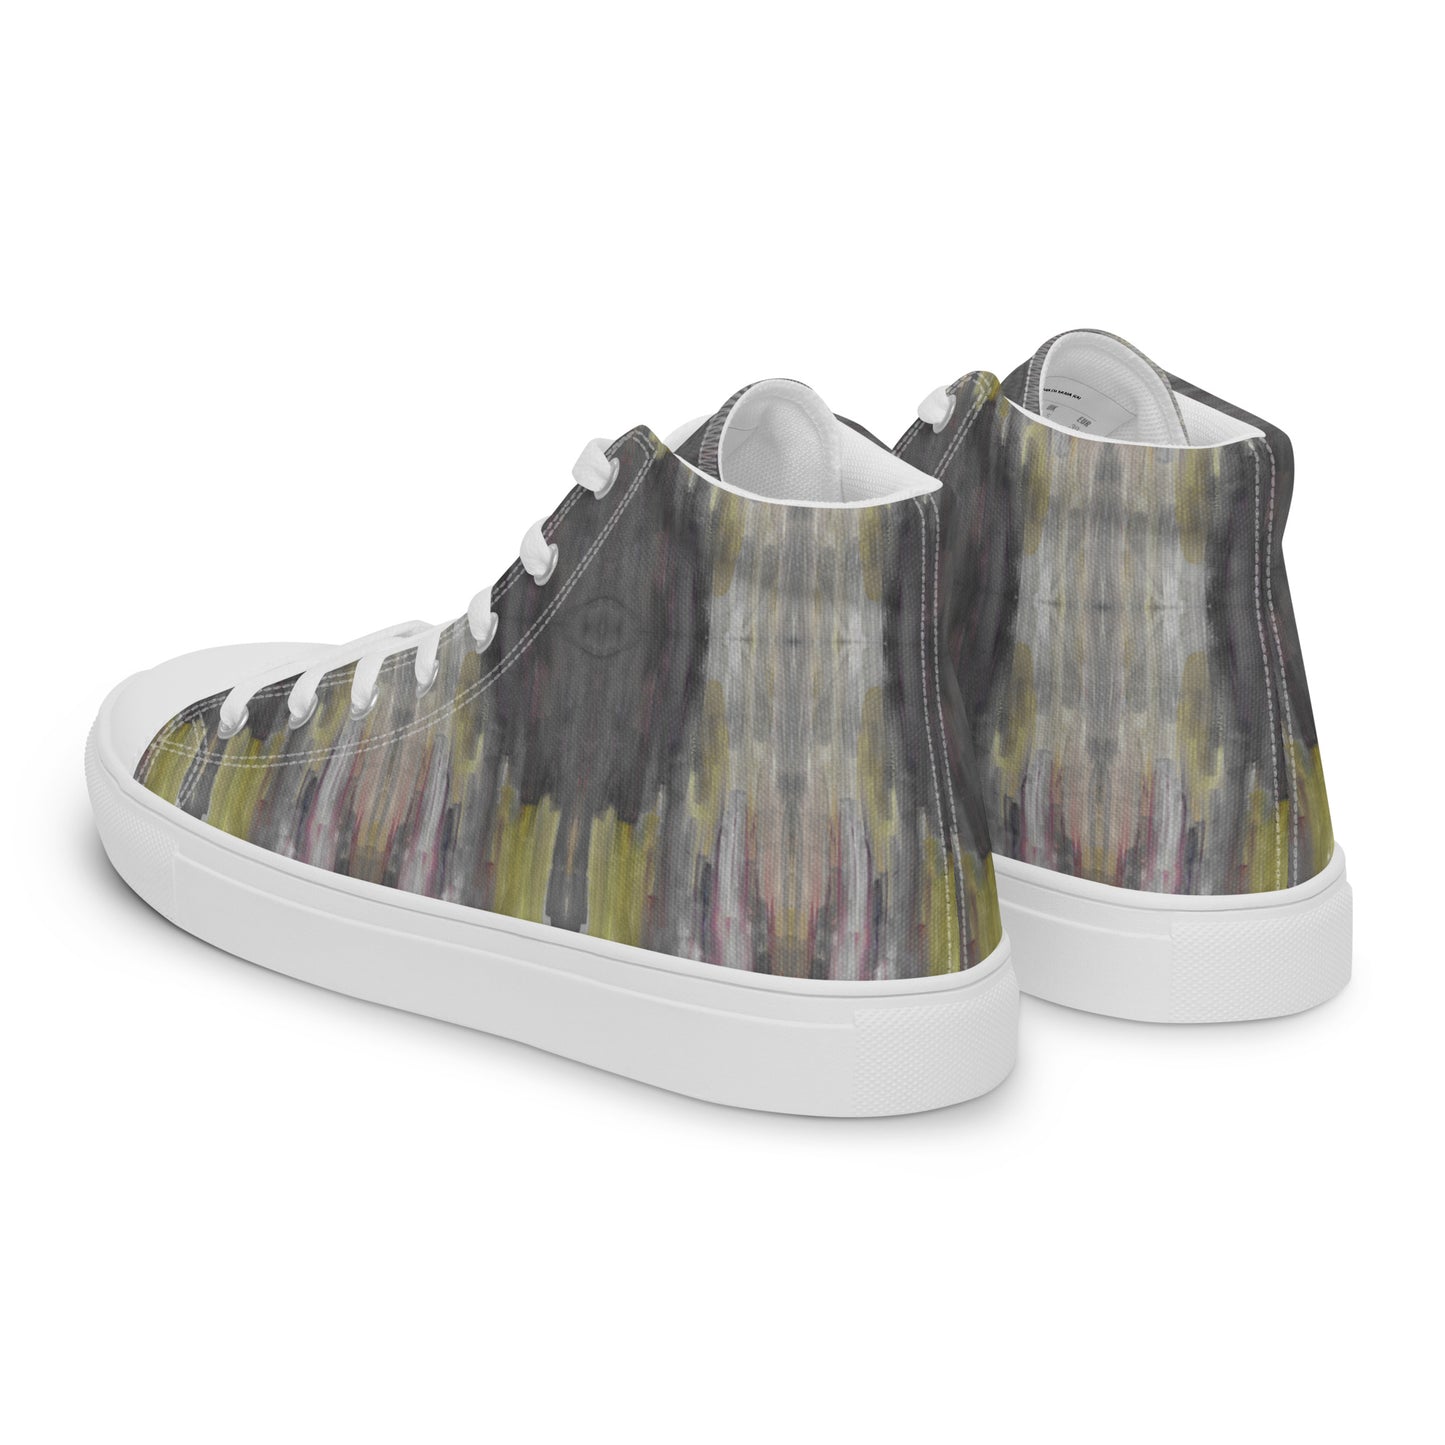 MERCURE - Women's high-top canvas trainers